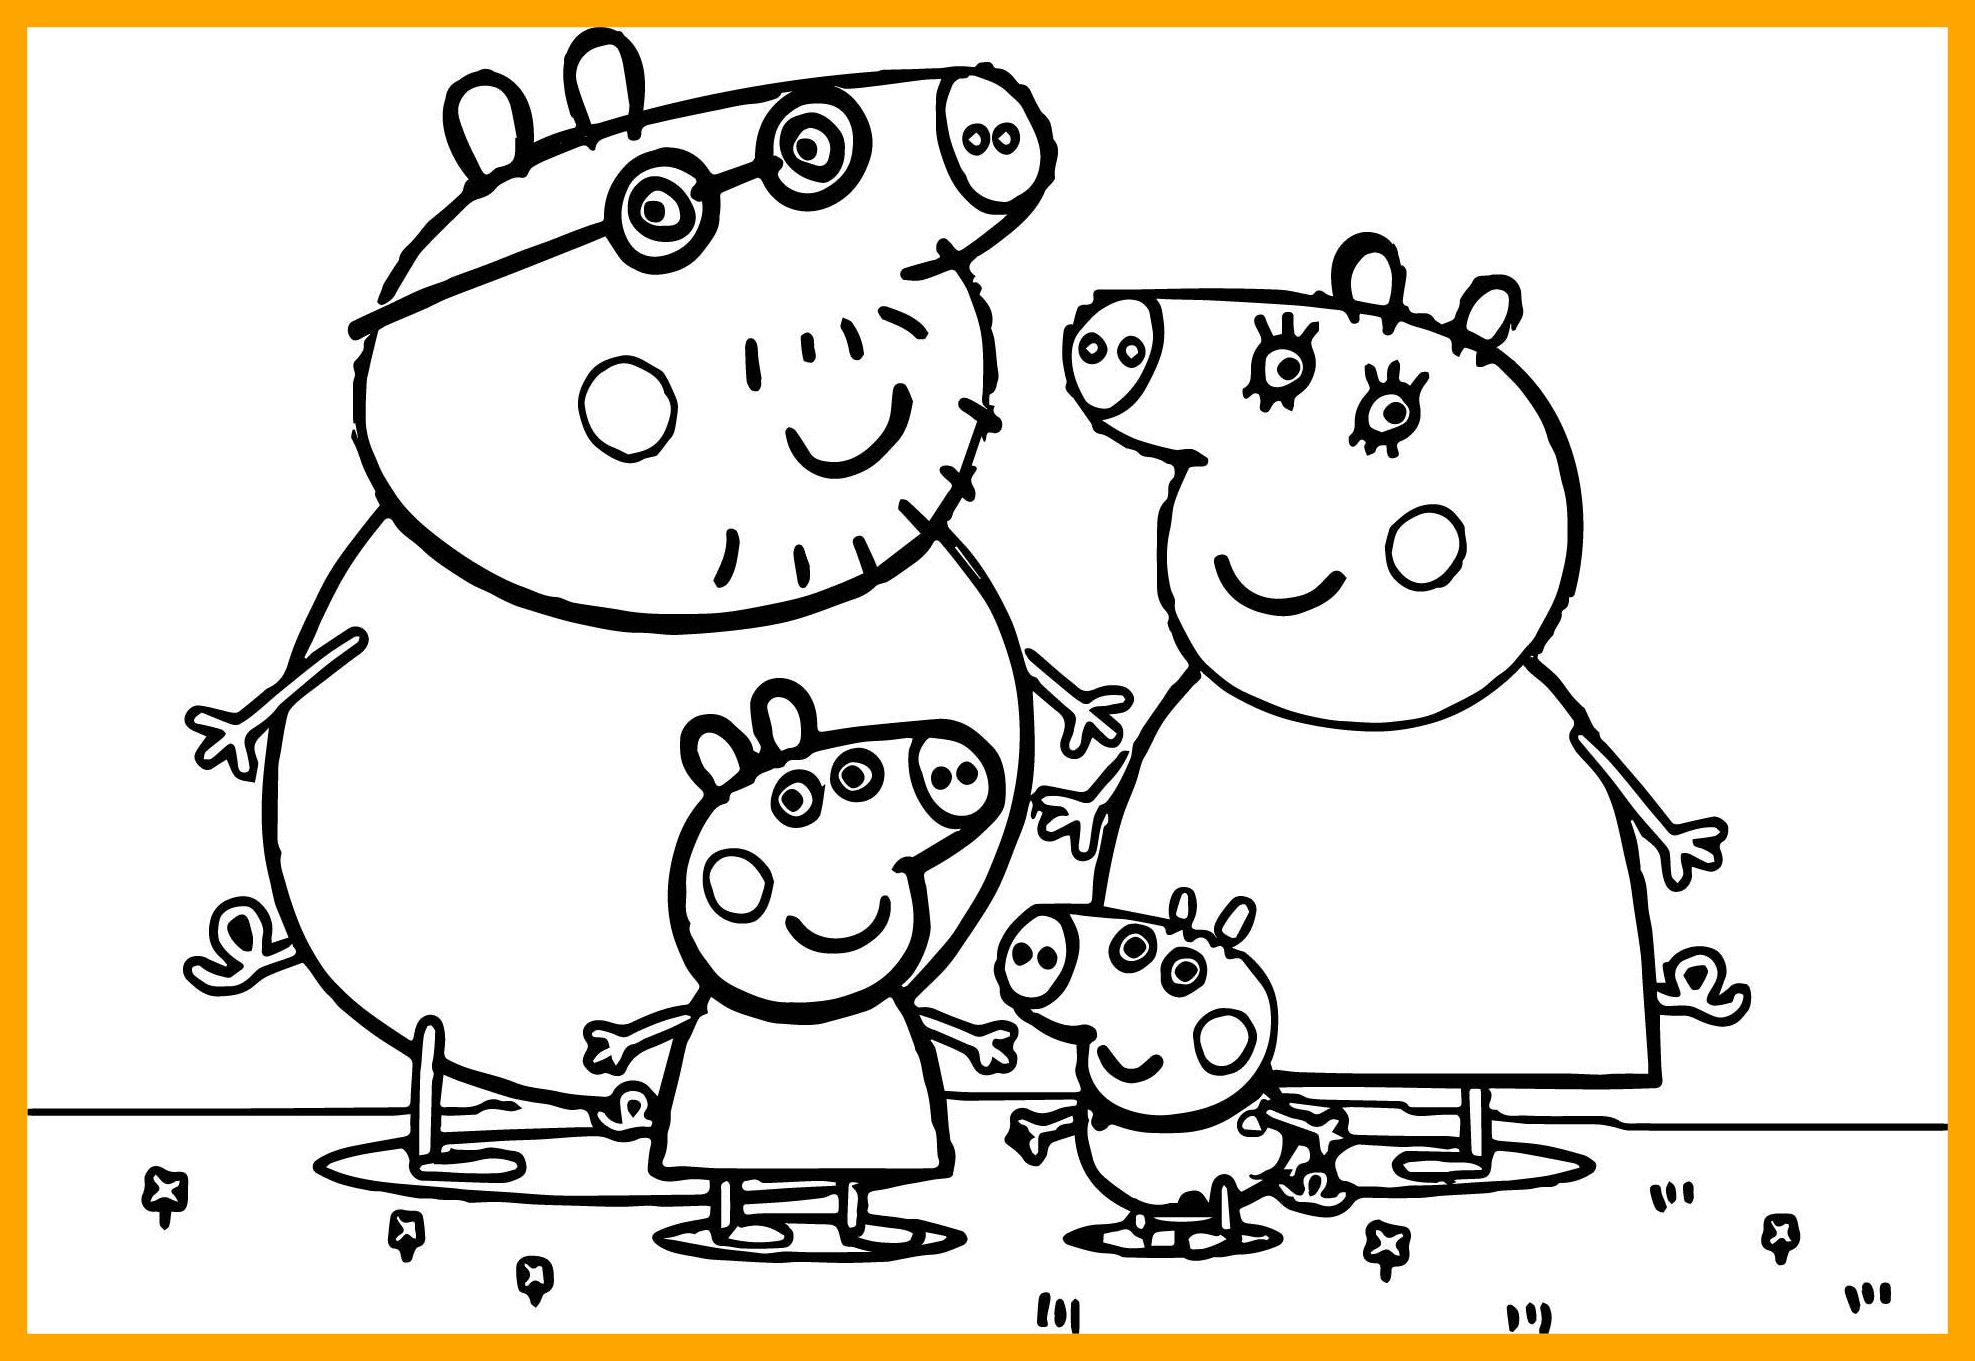  Free Printable Peppa Pig Coloring Pages with simple drawing